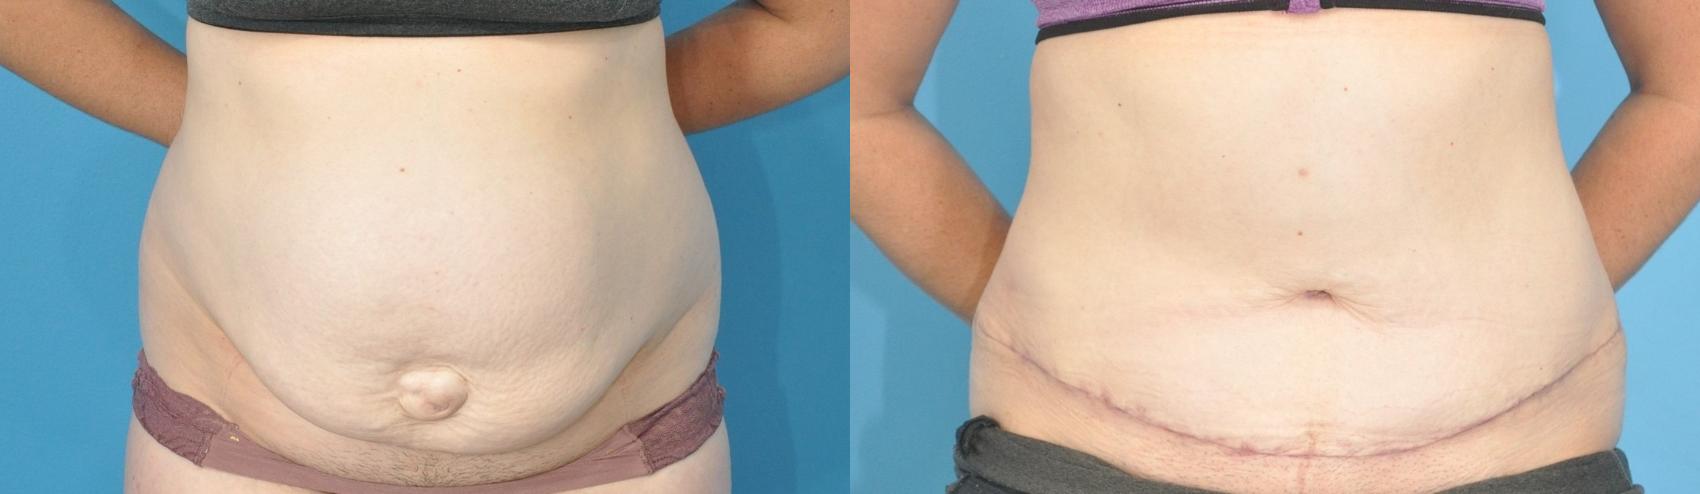 Tummy Tuck for North Shore and Arlington Heights, IL Dr image